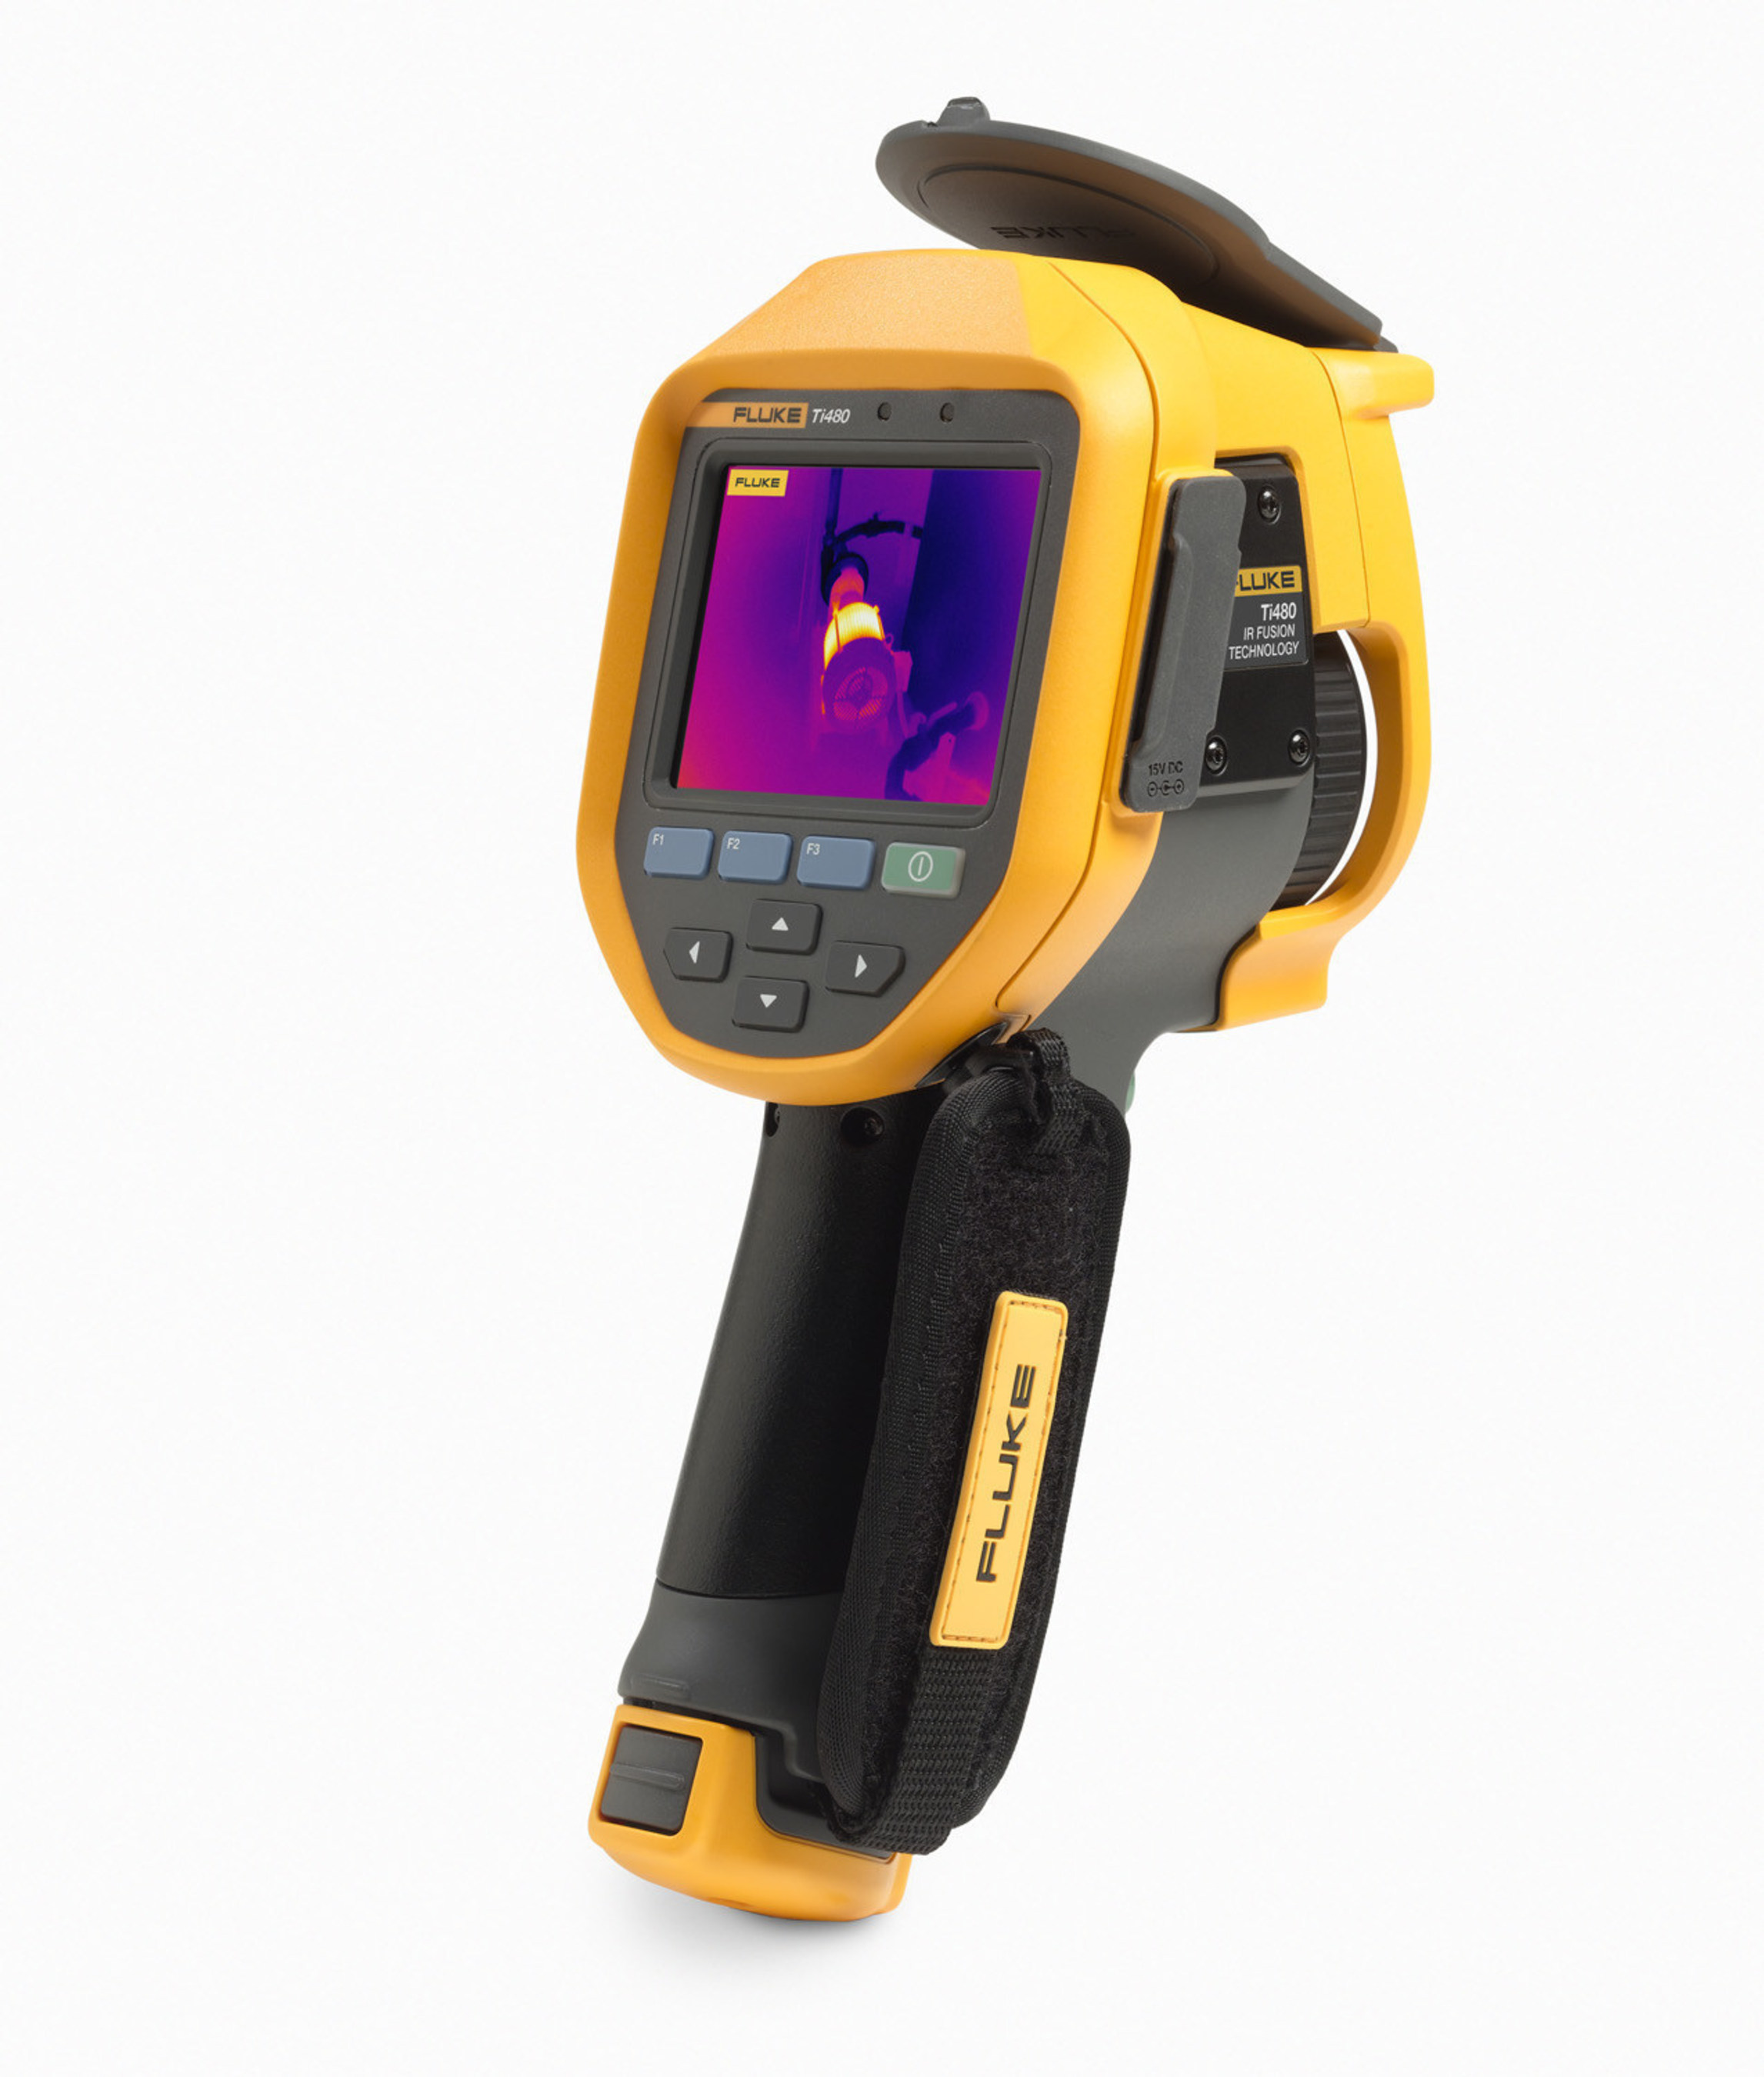 With the Ti480 Infrared Camera, Fluke introduces 640 x 480 resolution into a rugged, pistol-grip form factor. The camera provides fast, one-handed operation to perform multiple inspections quickly and accurately.